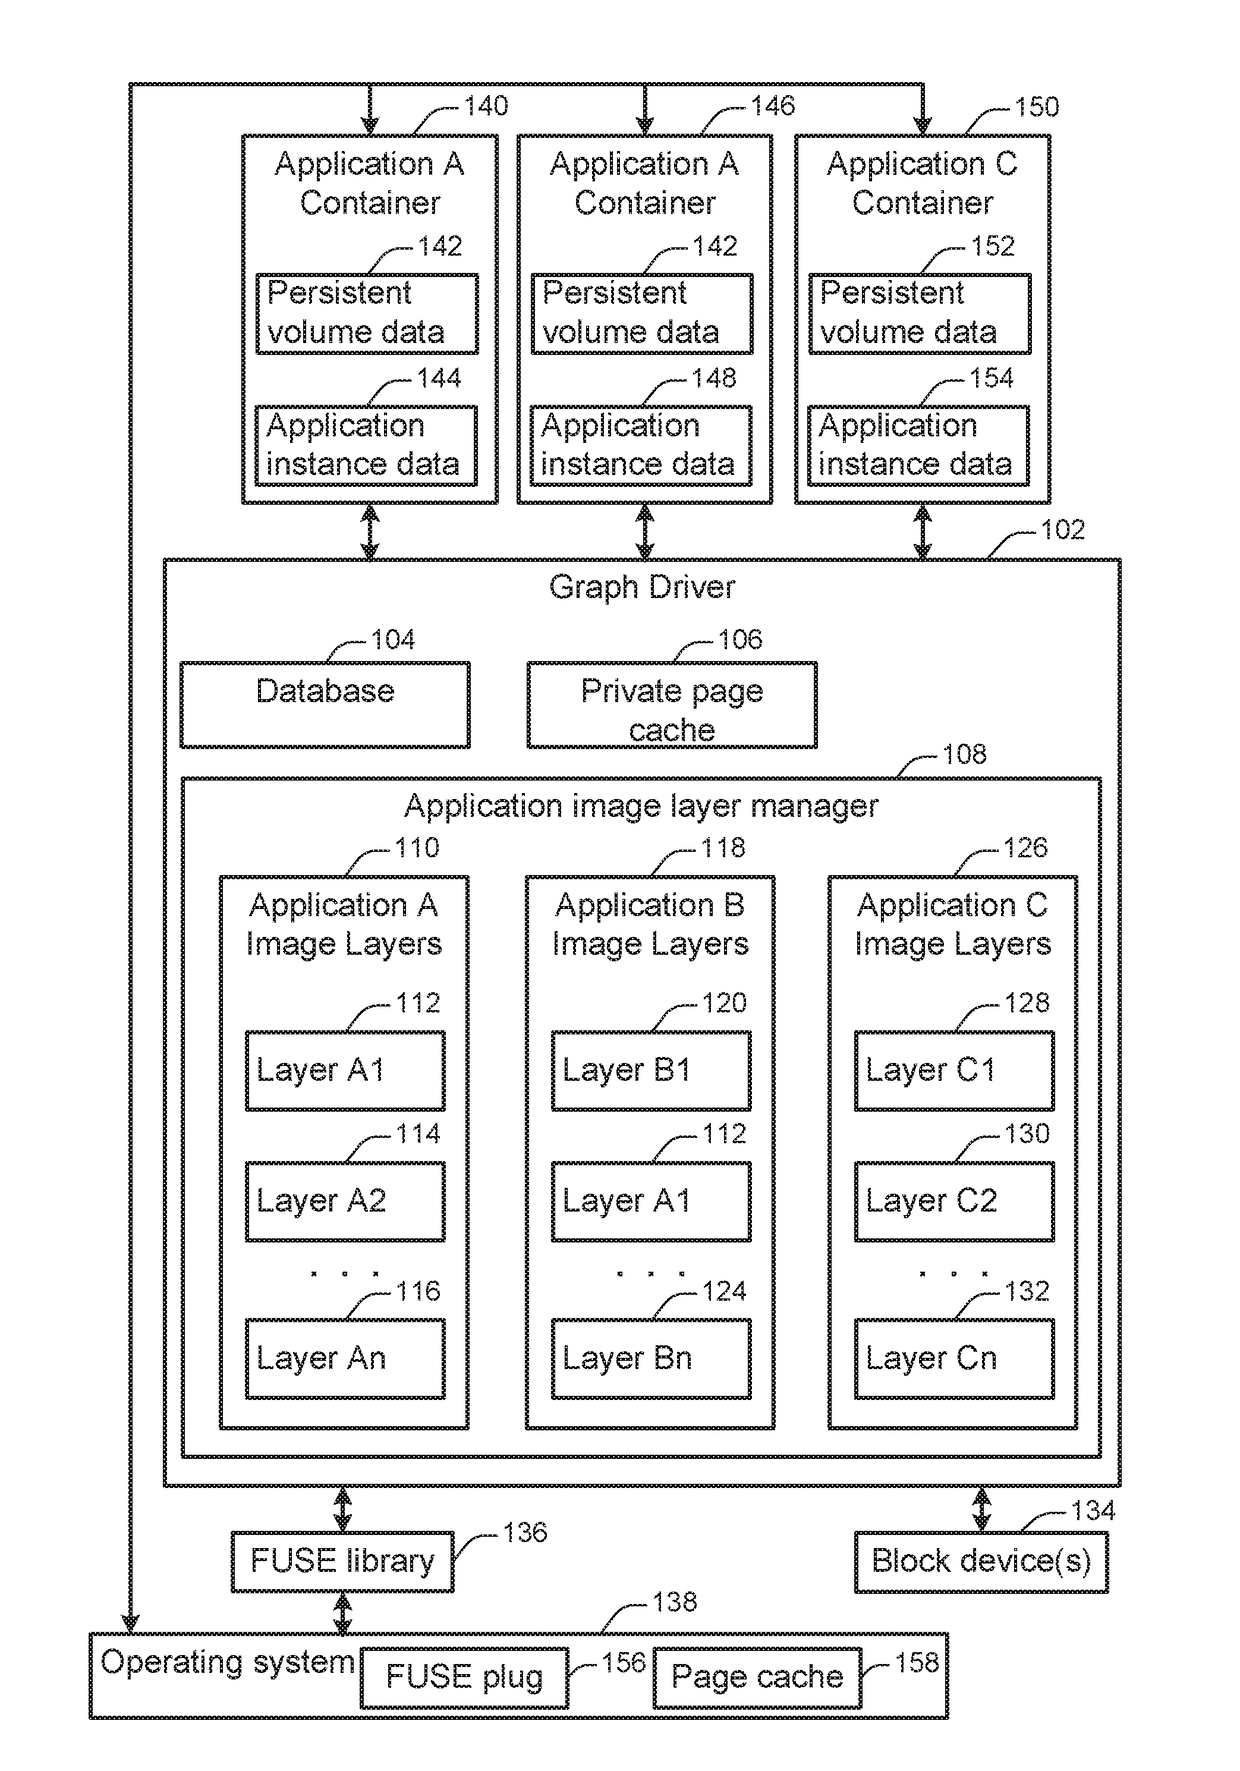 Containerized application system graph driver